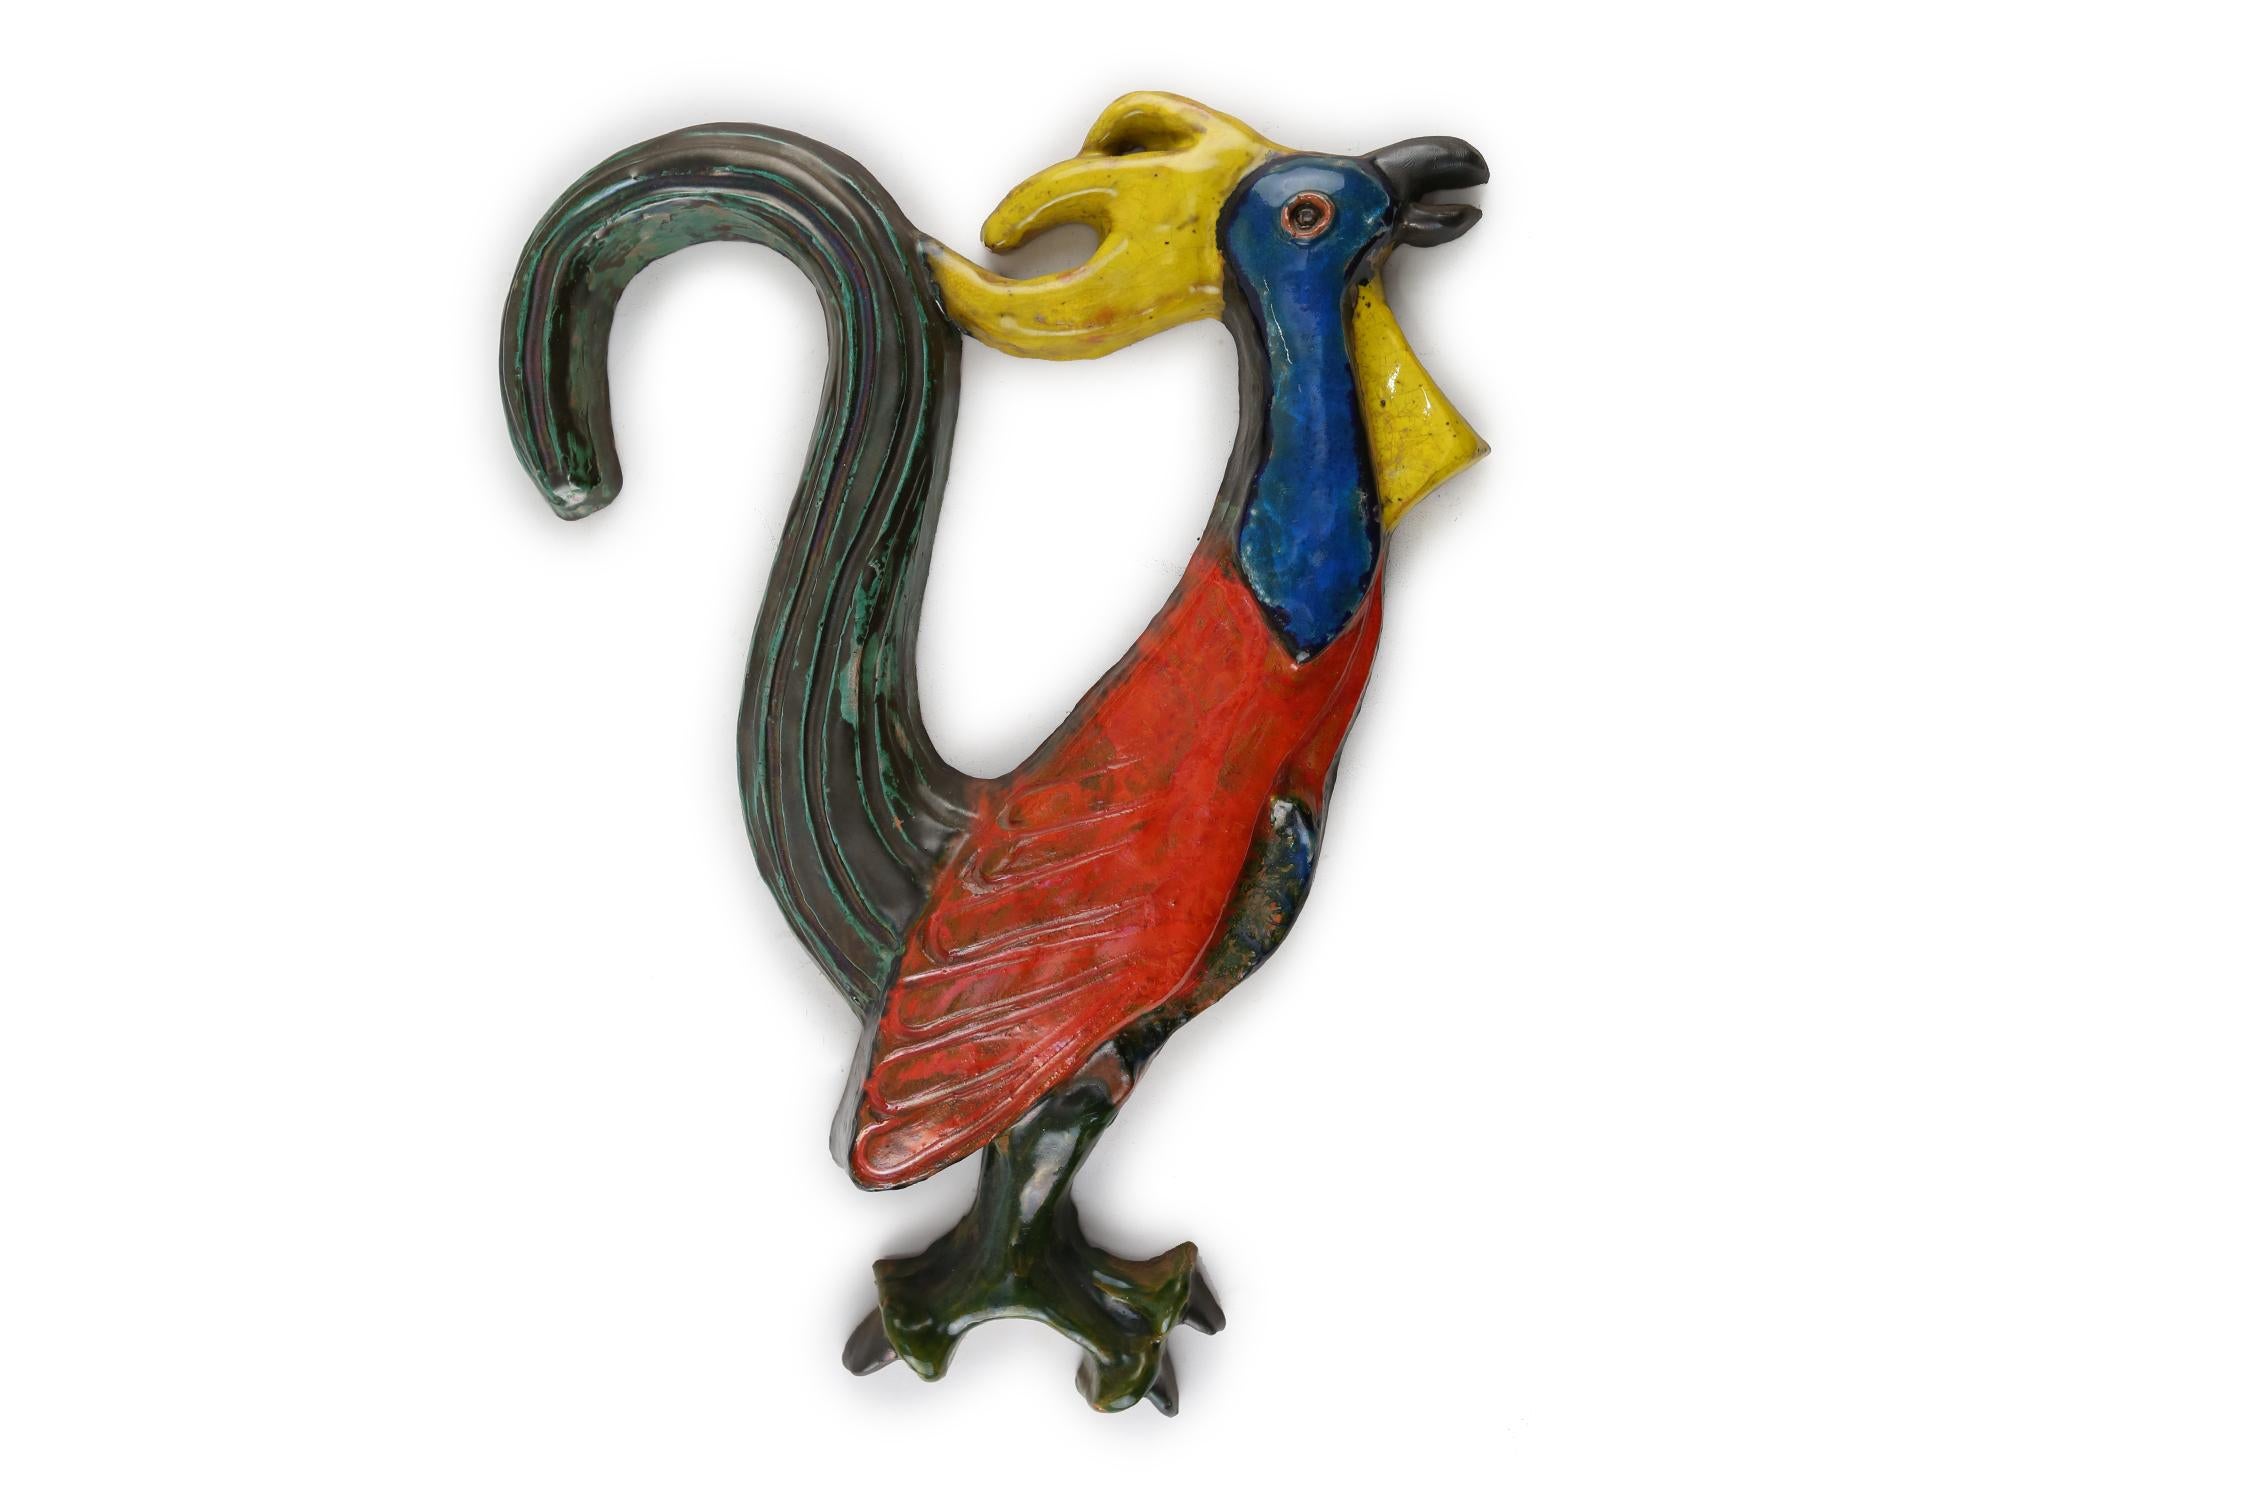 Beautiful ceramic rooster with some great colors.